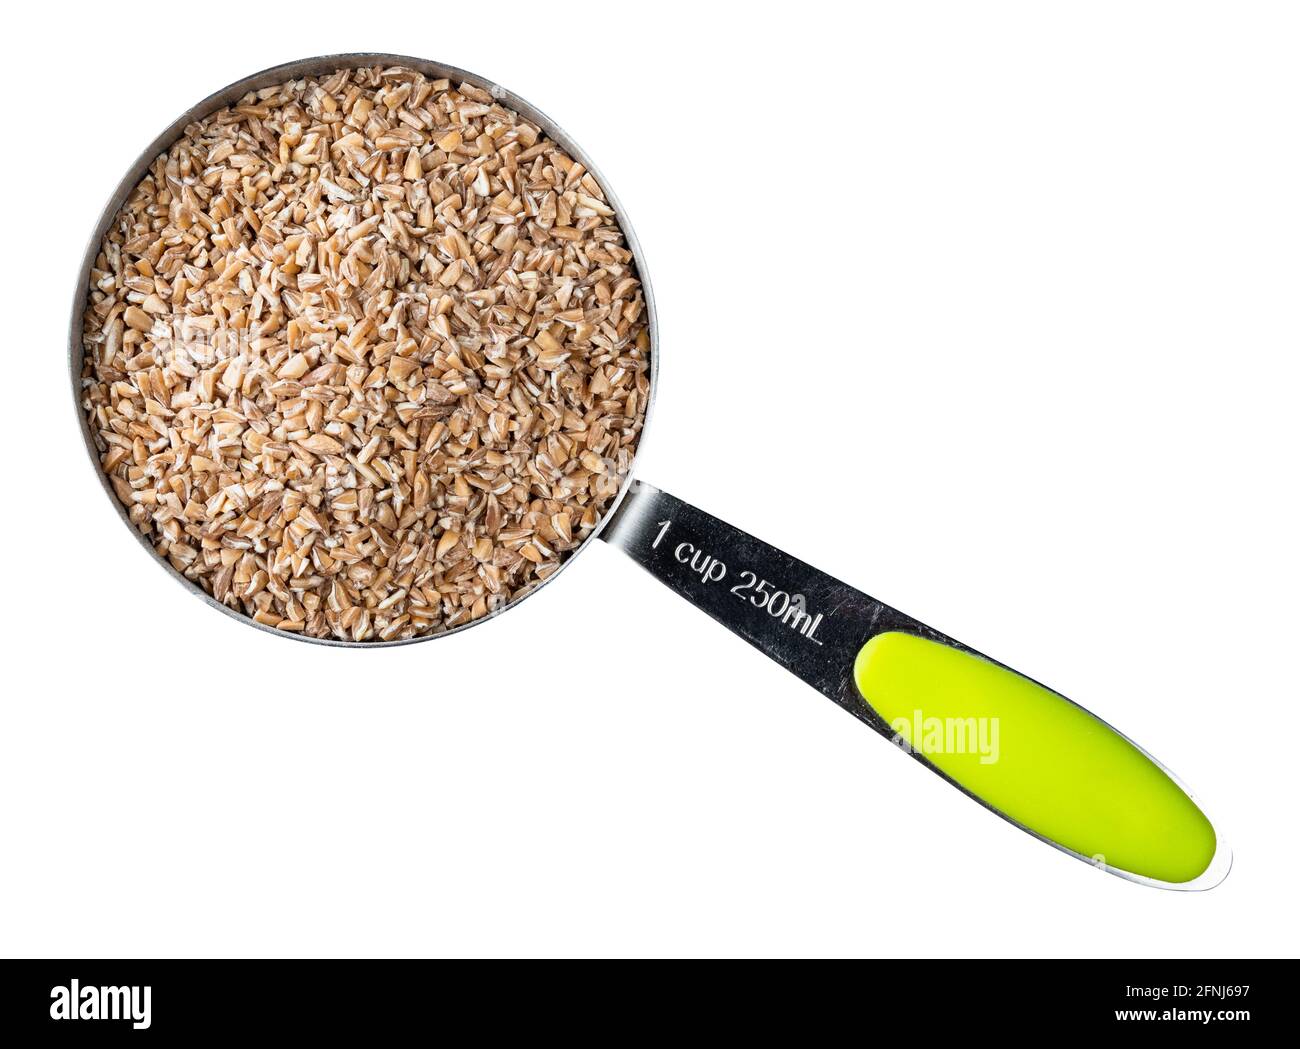 top view of crushed groats of Emmer farro hulled wheat in measuring cup cutout on white background Stock Photo